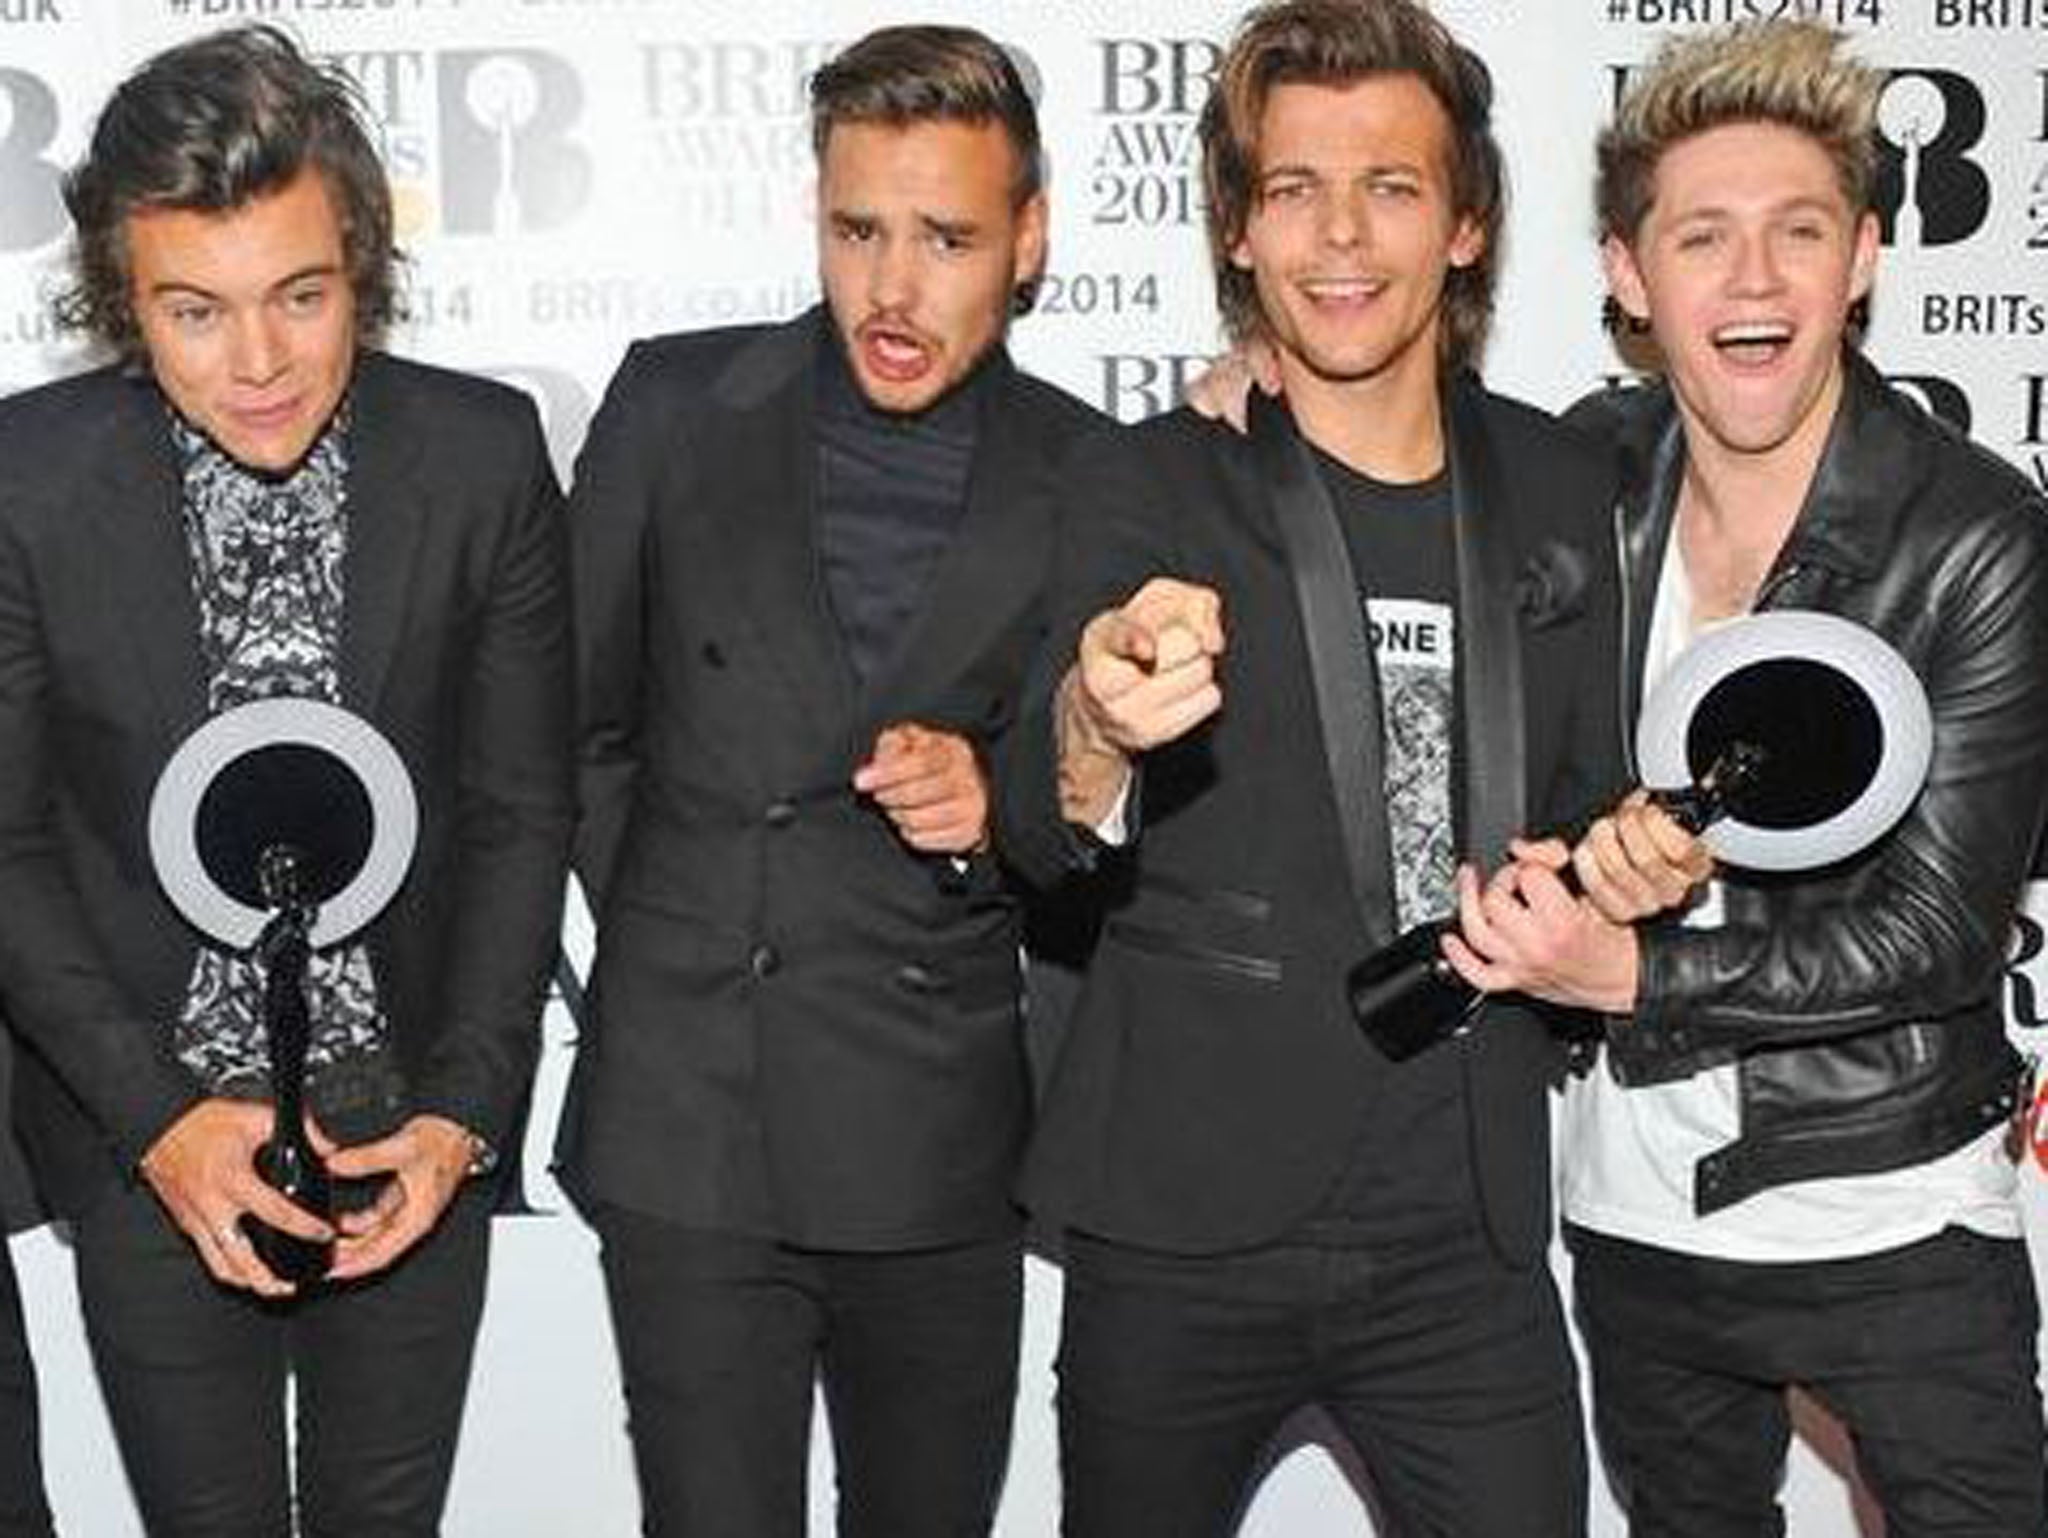 One Direction without Zayn Malik, who quit the band in March